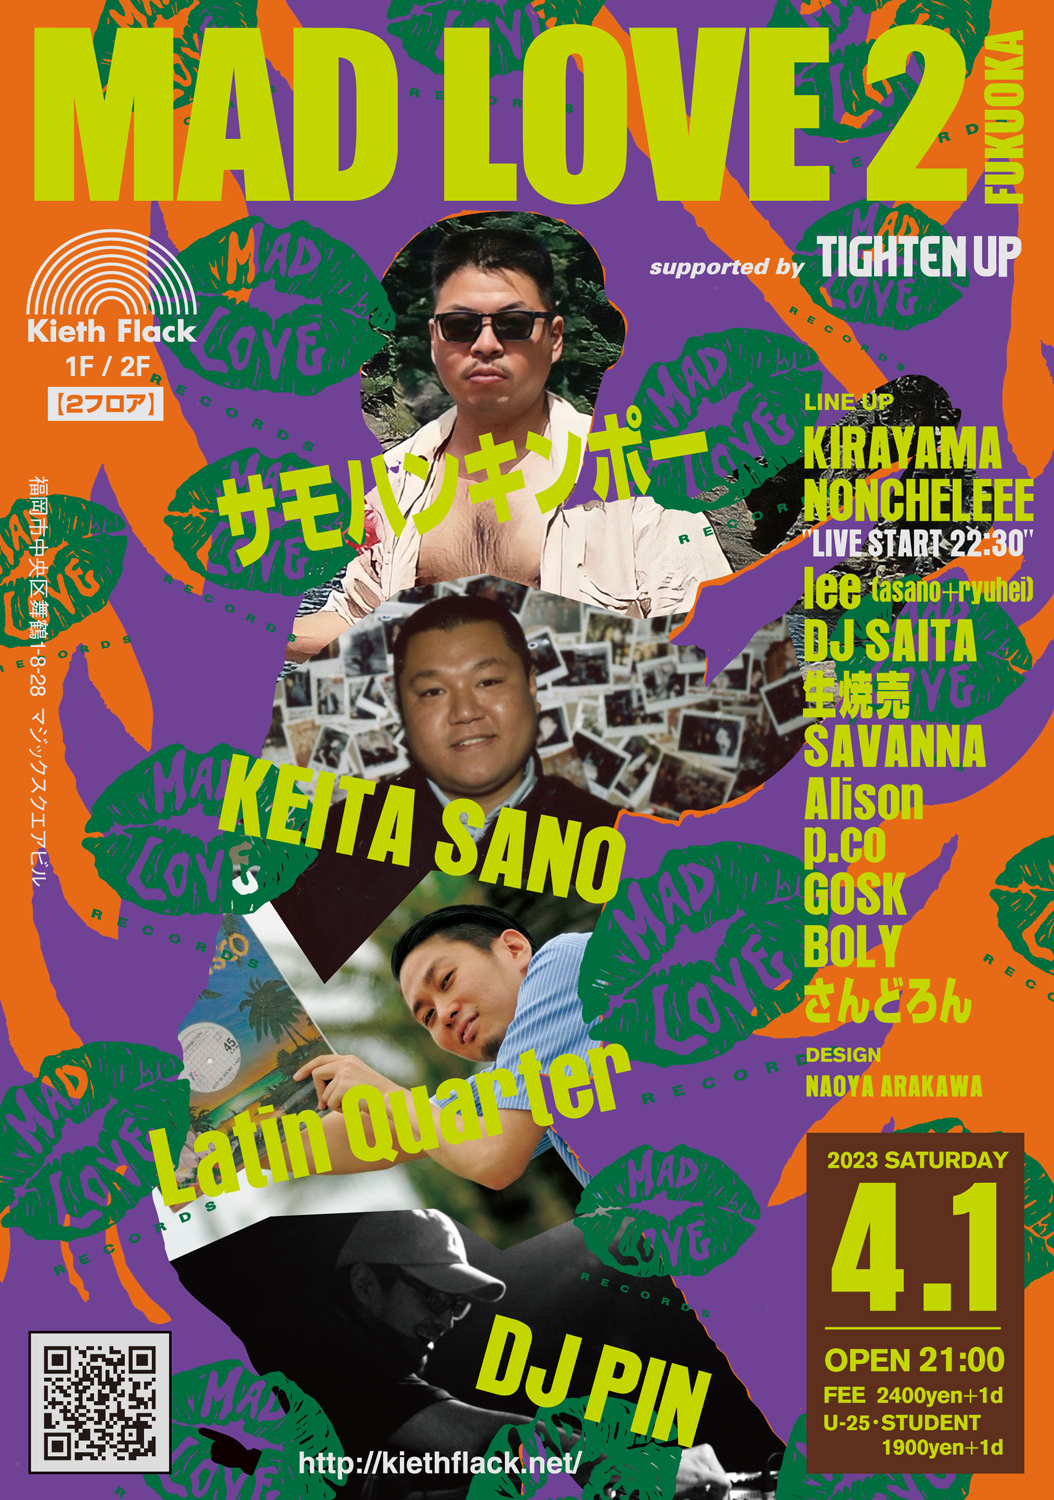 MAD LOVE 2 FUKUOKA supported by TIGHTEN UP